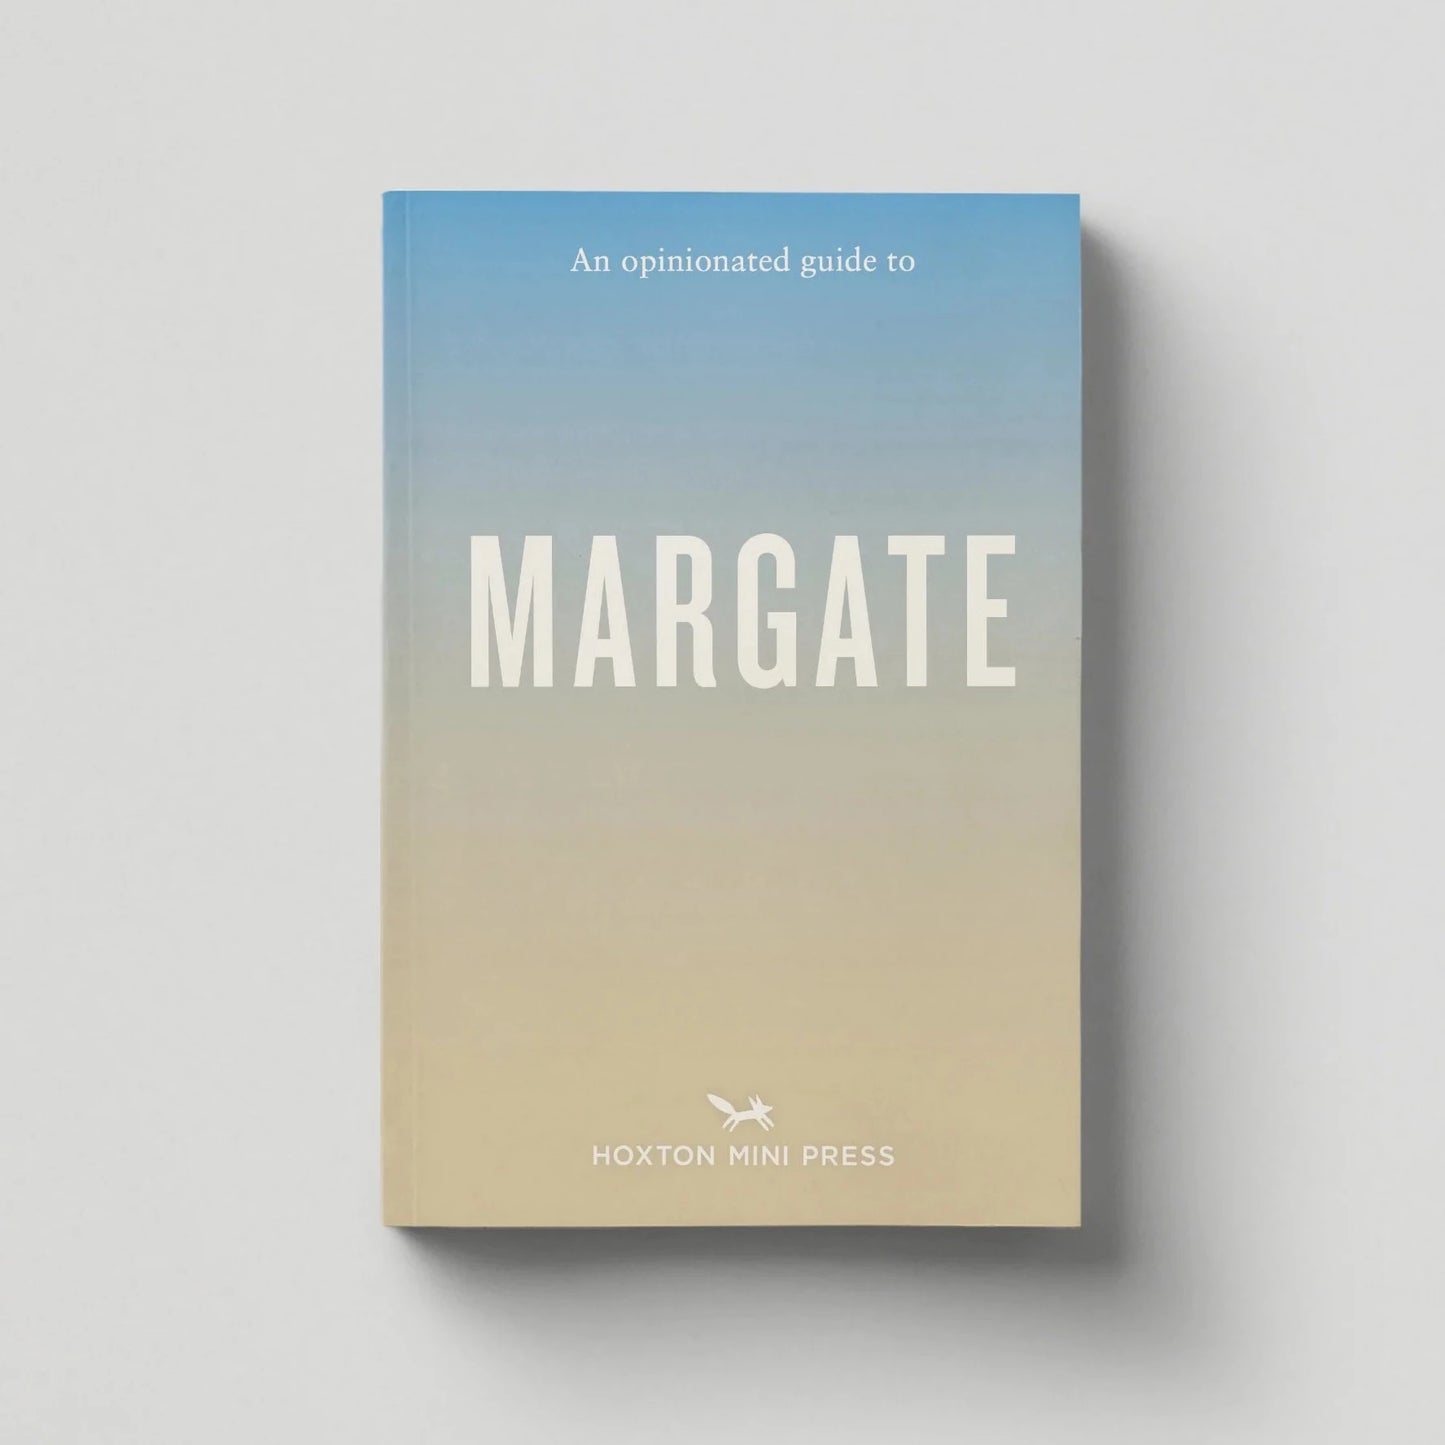 An Opinionated Guide To Margate